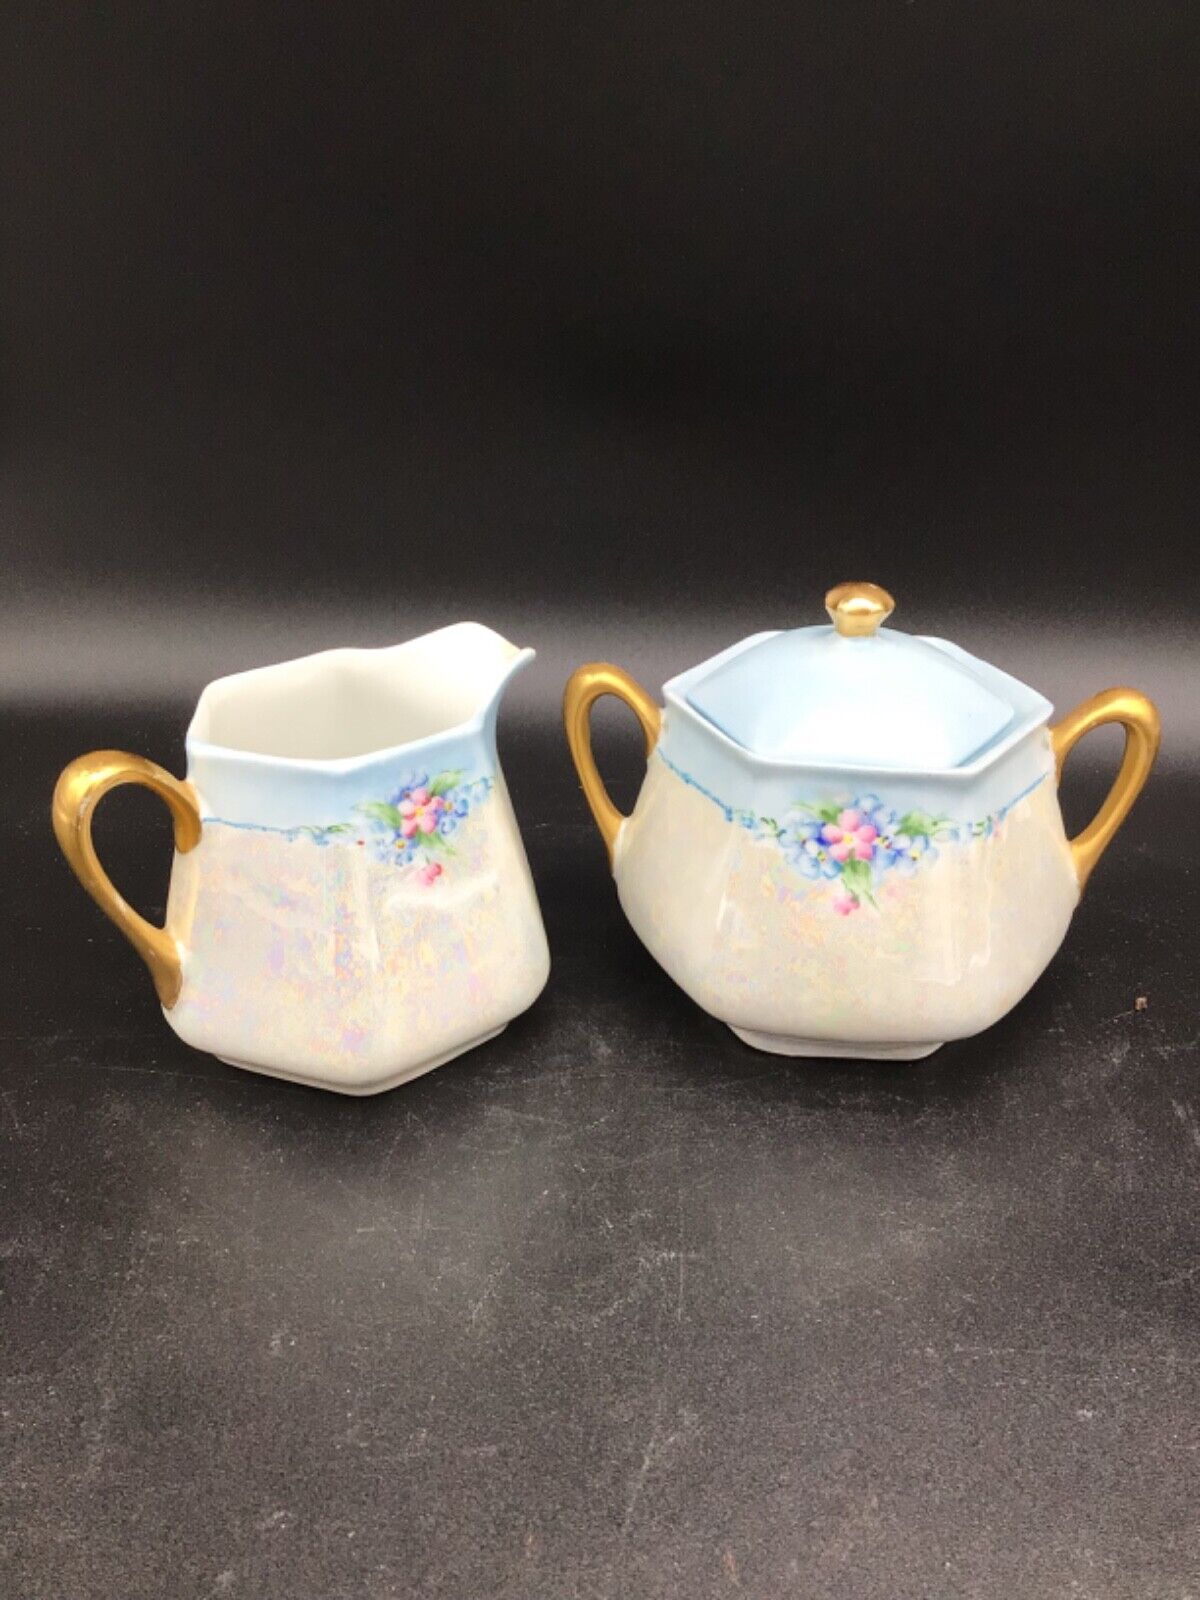 Antique German Porcelain Creamer and Sugar with Lid Iridescent Blue Pink Flowers